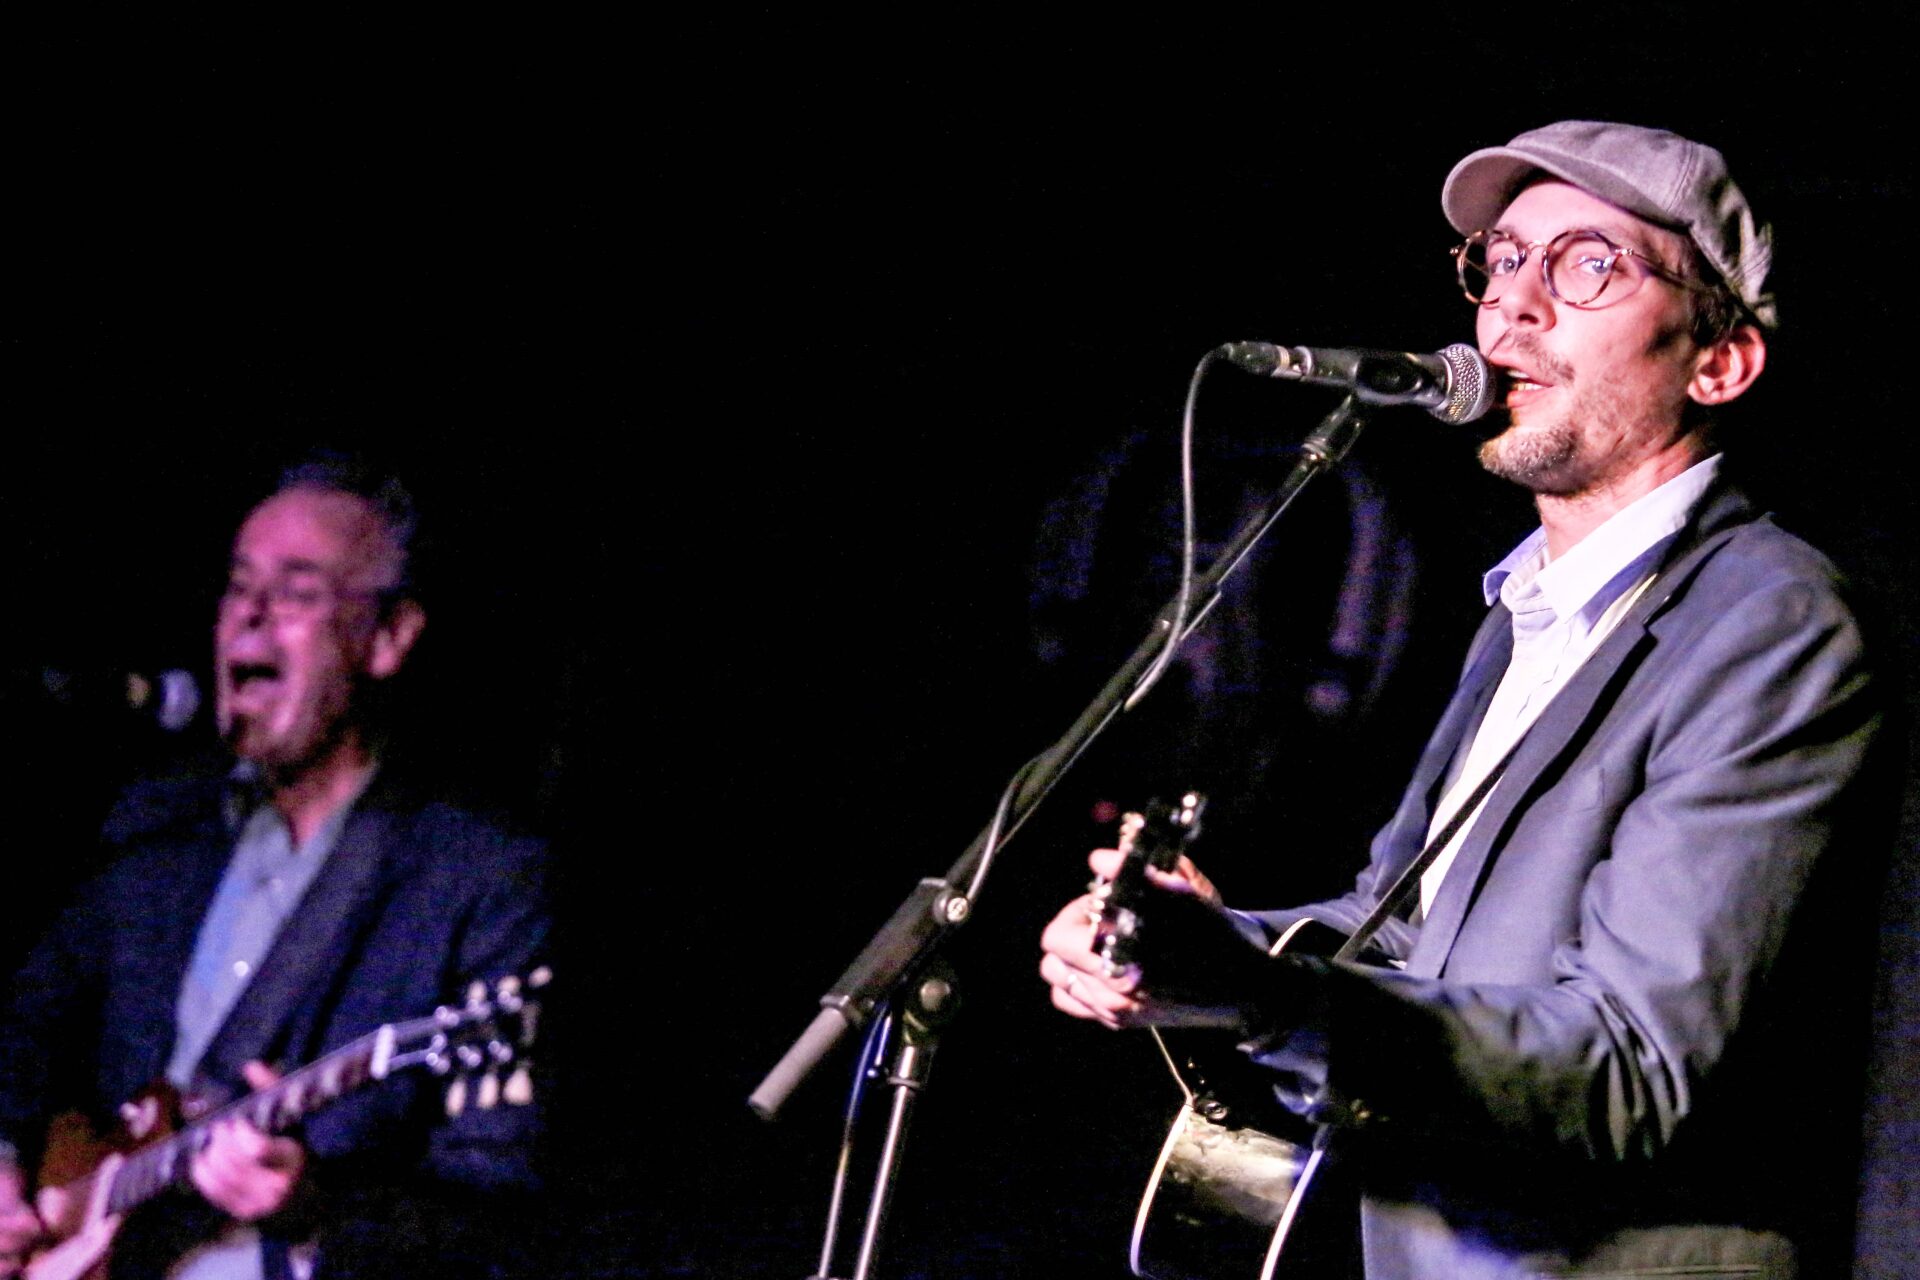 Justin Townes Earle – The Crescent, York, 03/07/2017 1